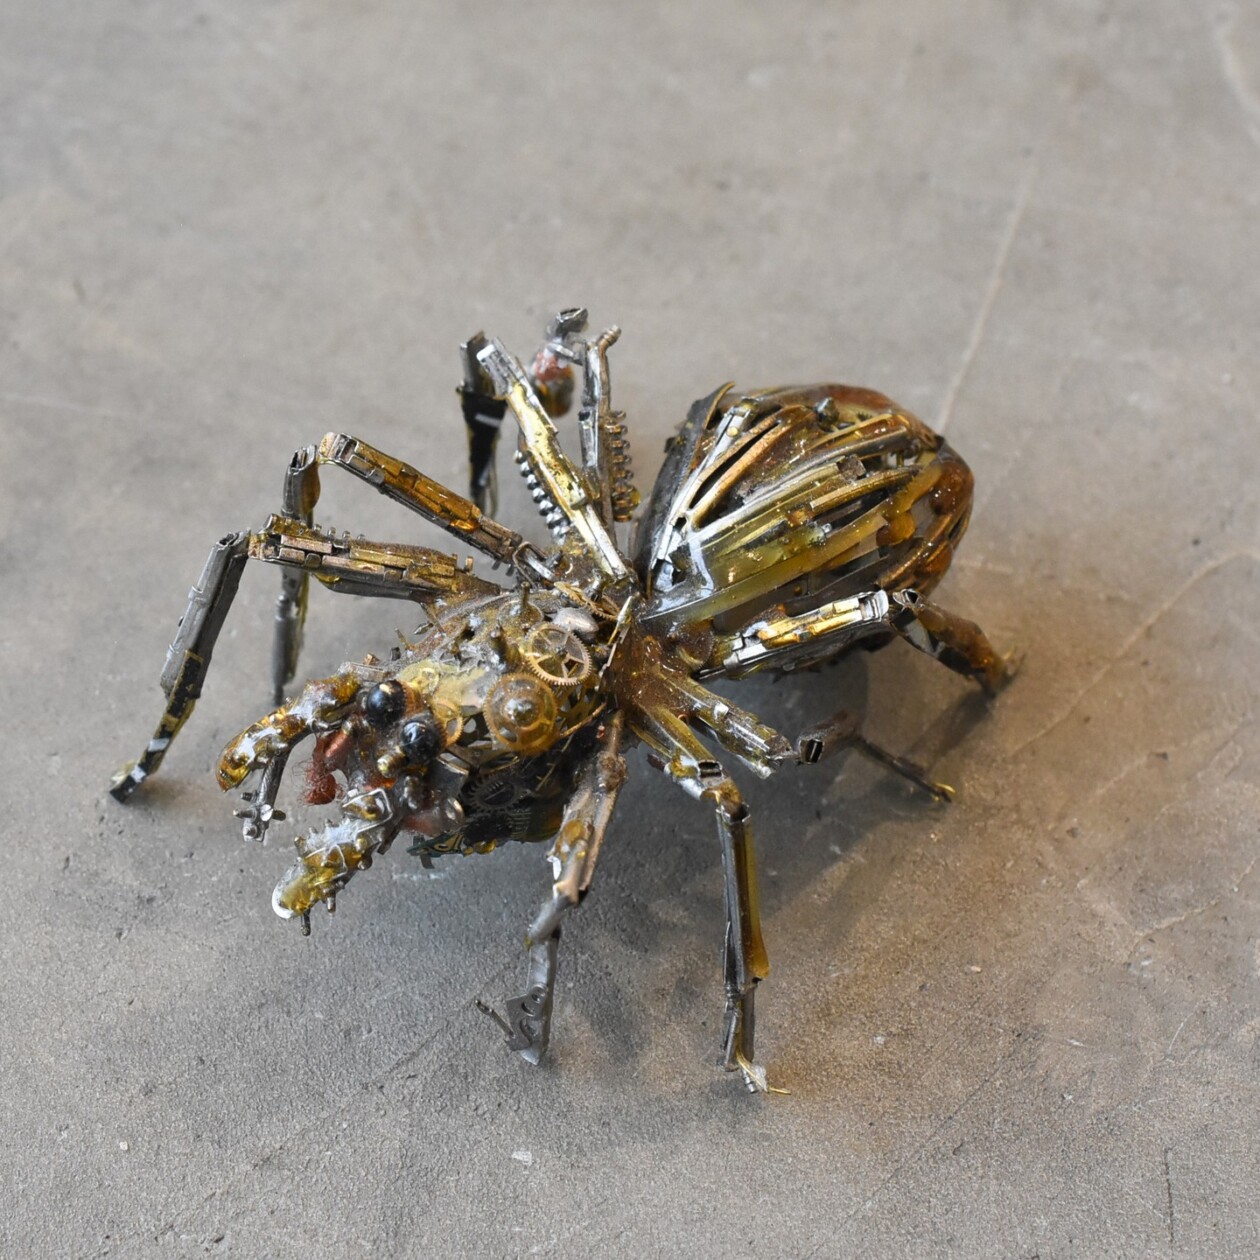 Spare Parts Of Clocks And Glasses Upcycled Into Incredible Animal Sculptures By Megane Tokei Ito (13)